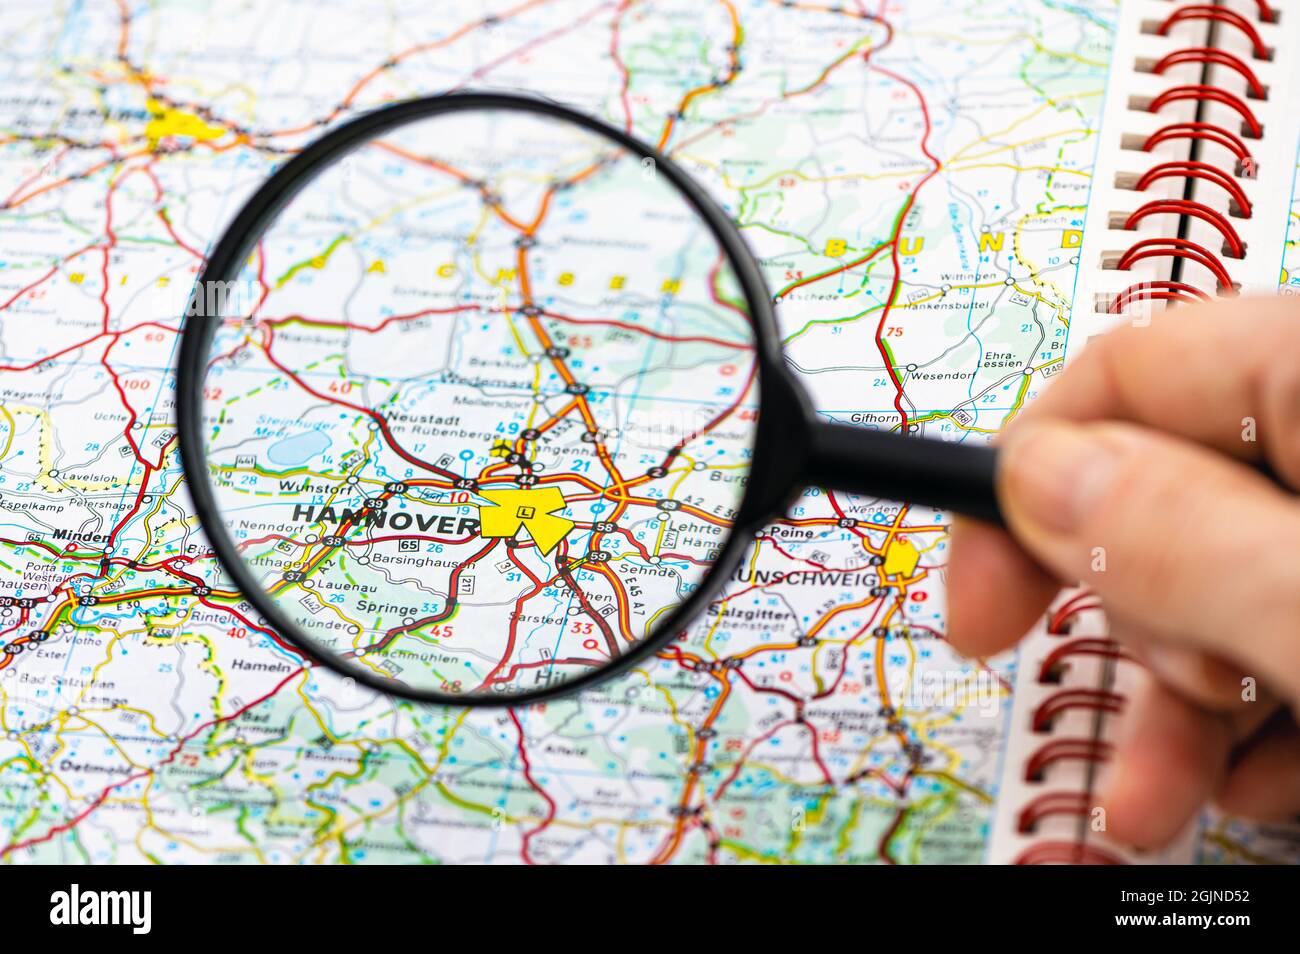 map of Hannover in Germany through magnifying glass, concept of planning the travel itinerary Stock Photo